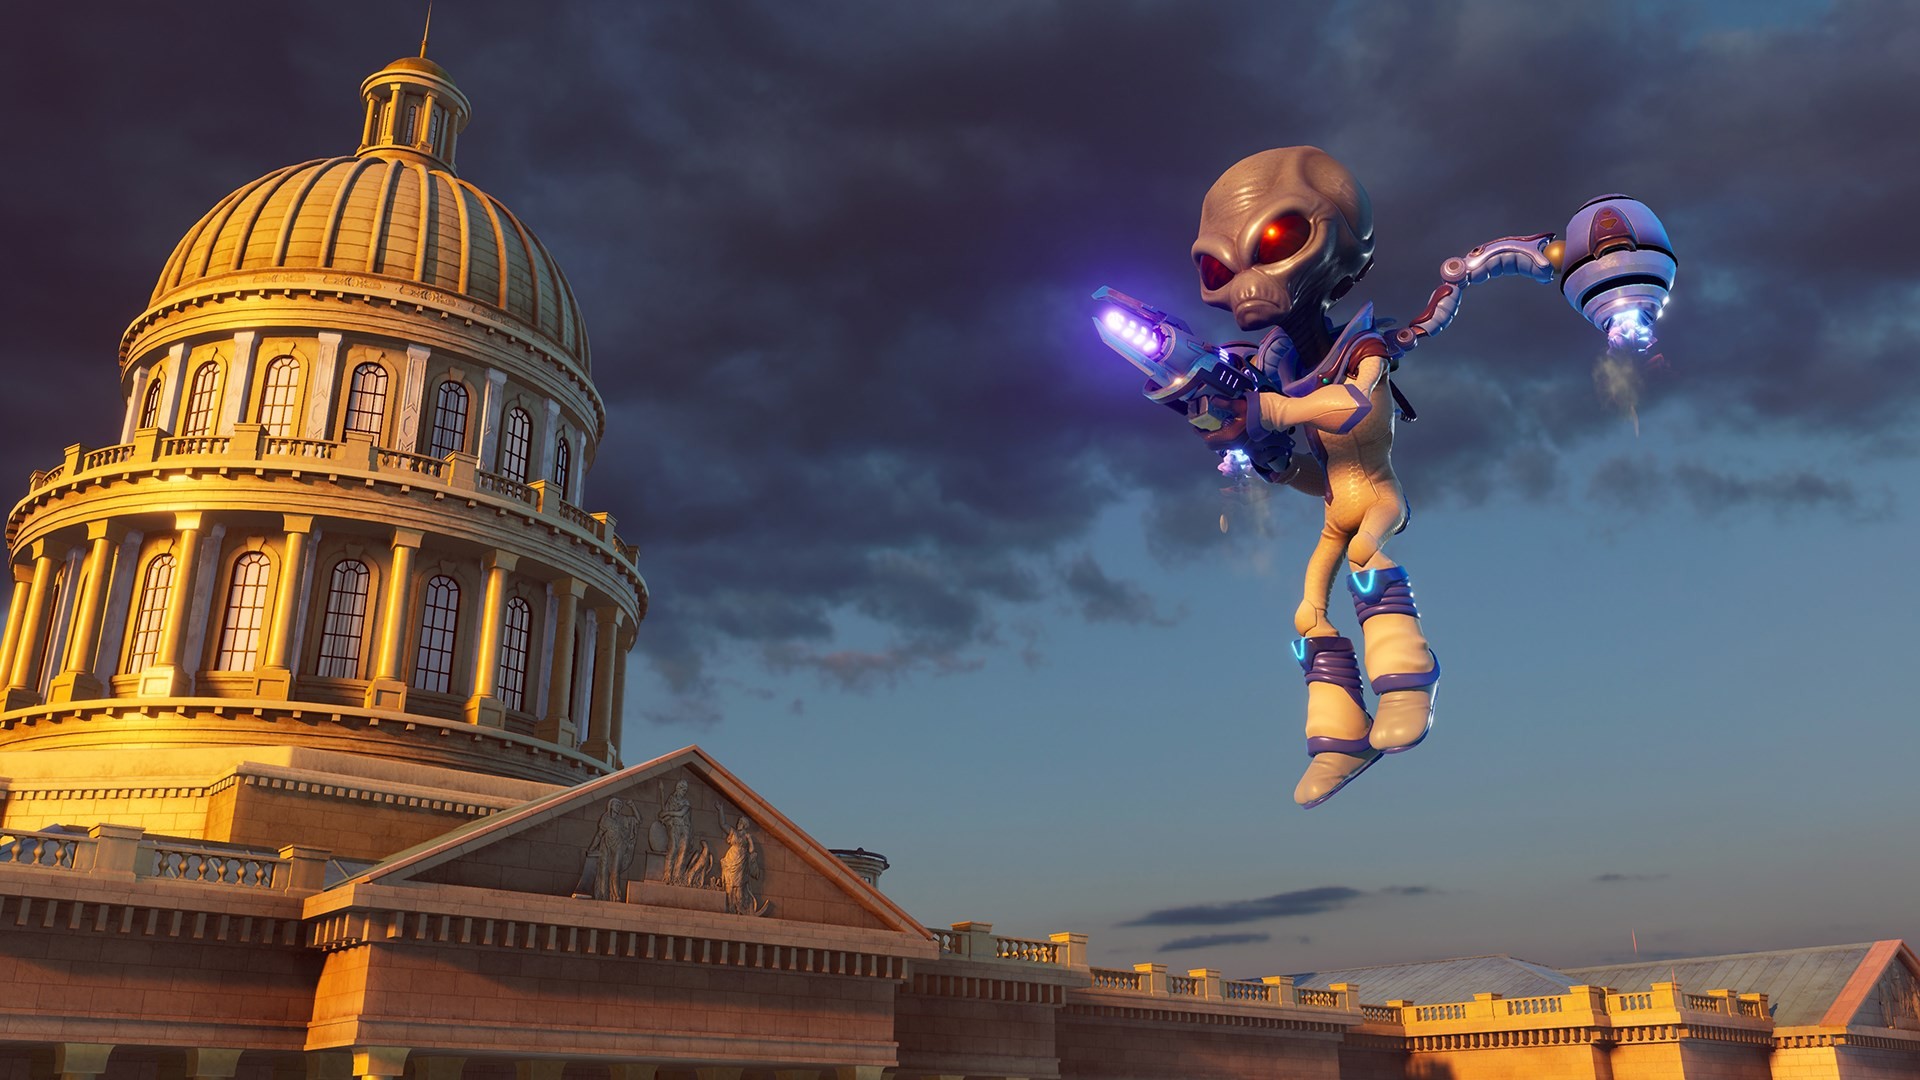 destroy all humans 2020 game pass